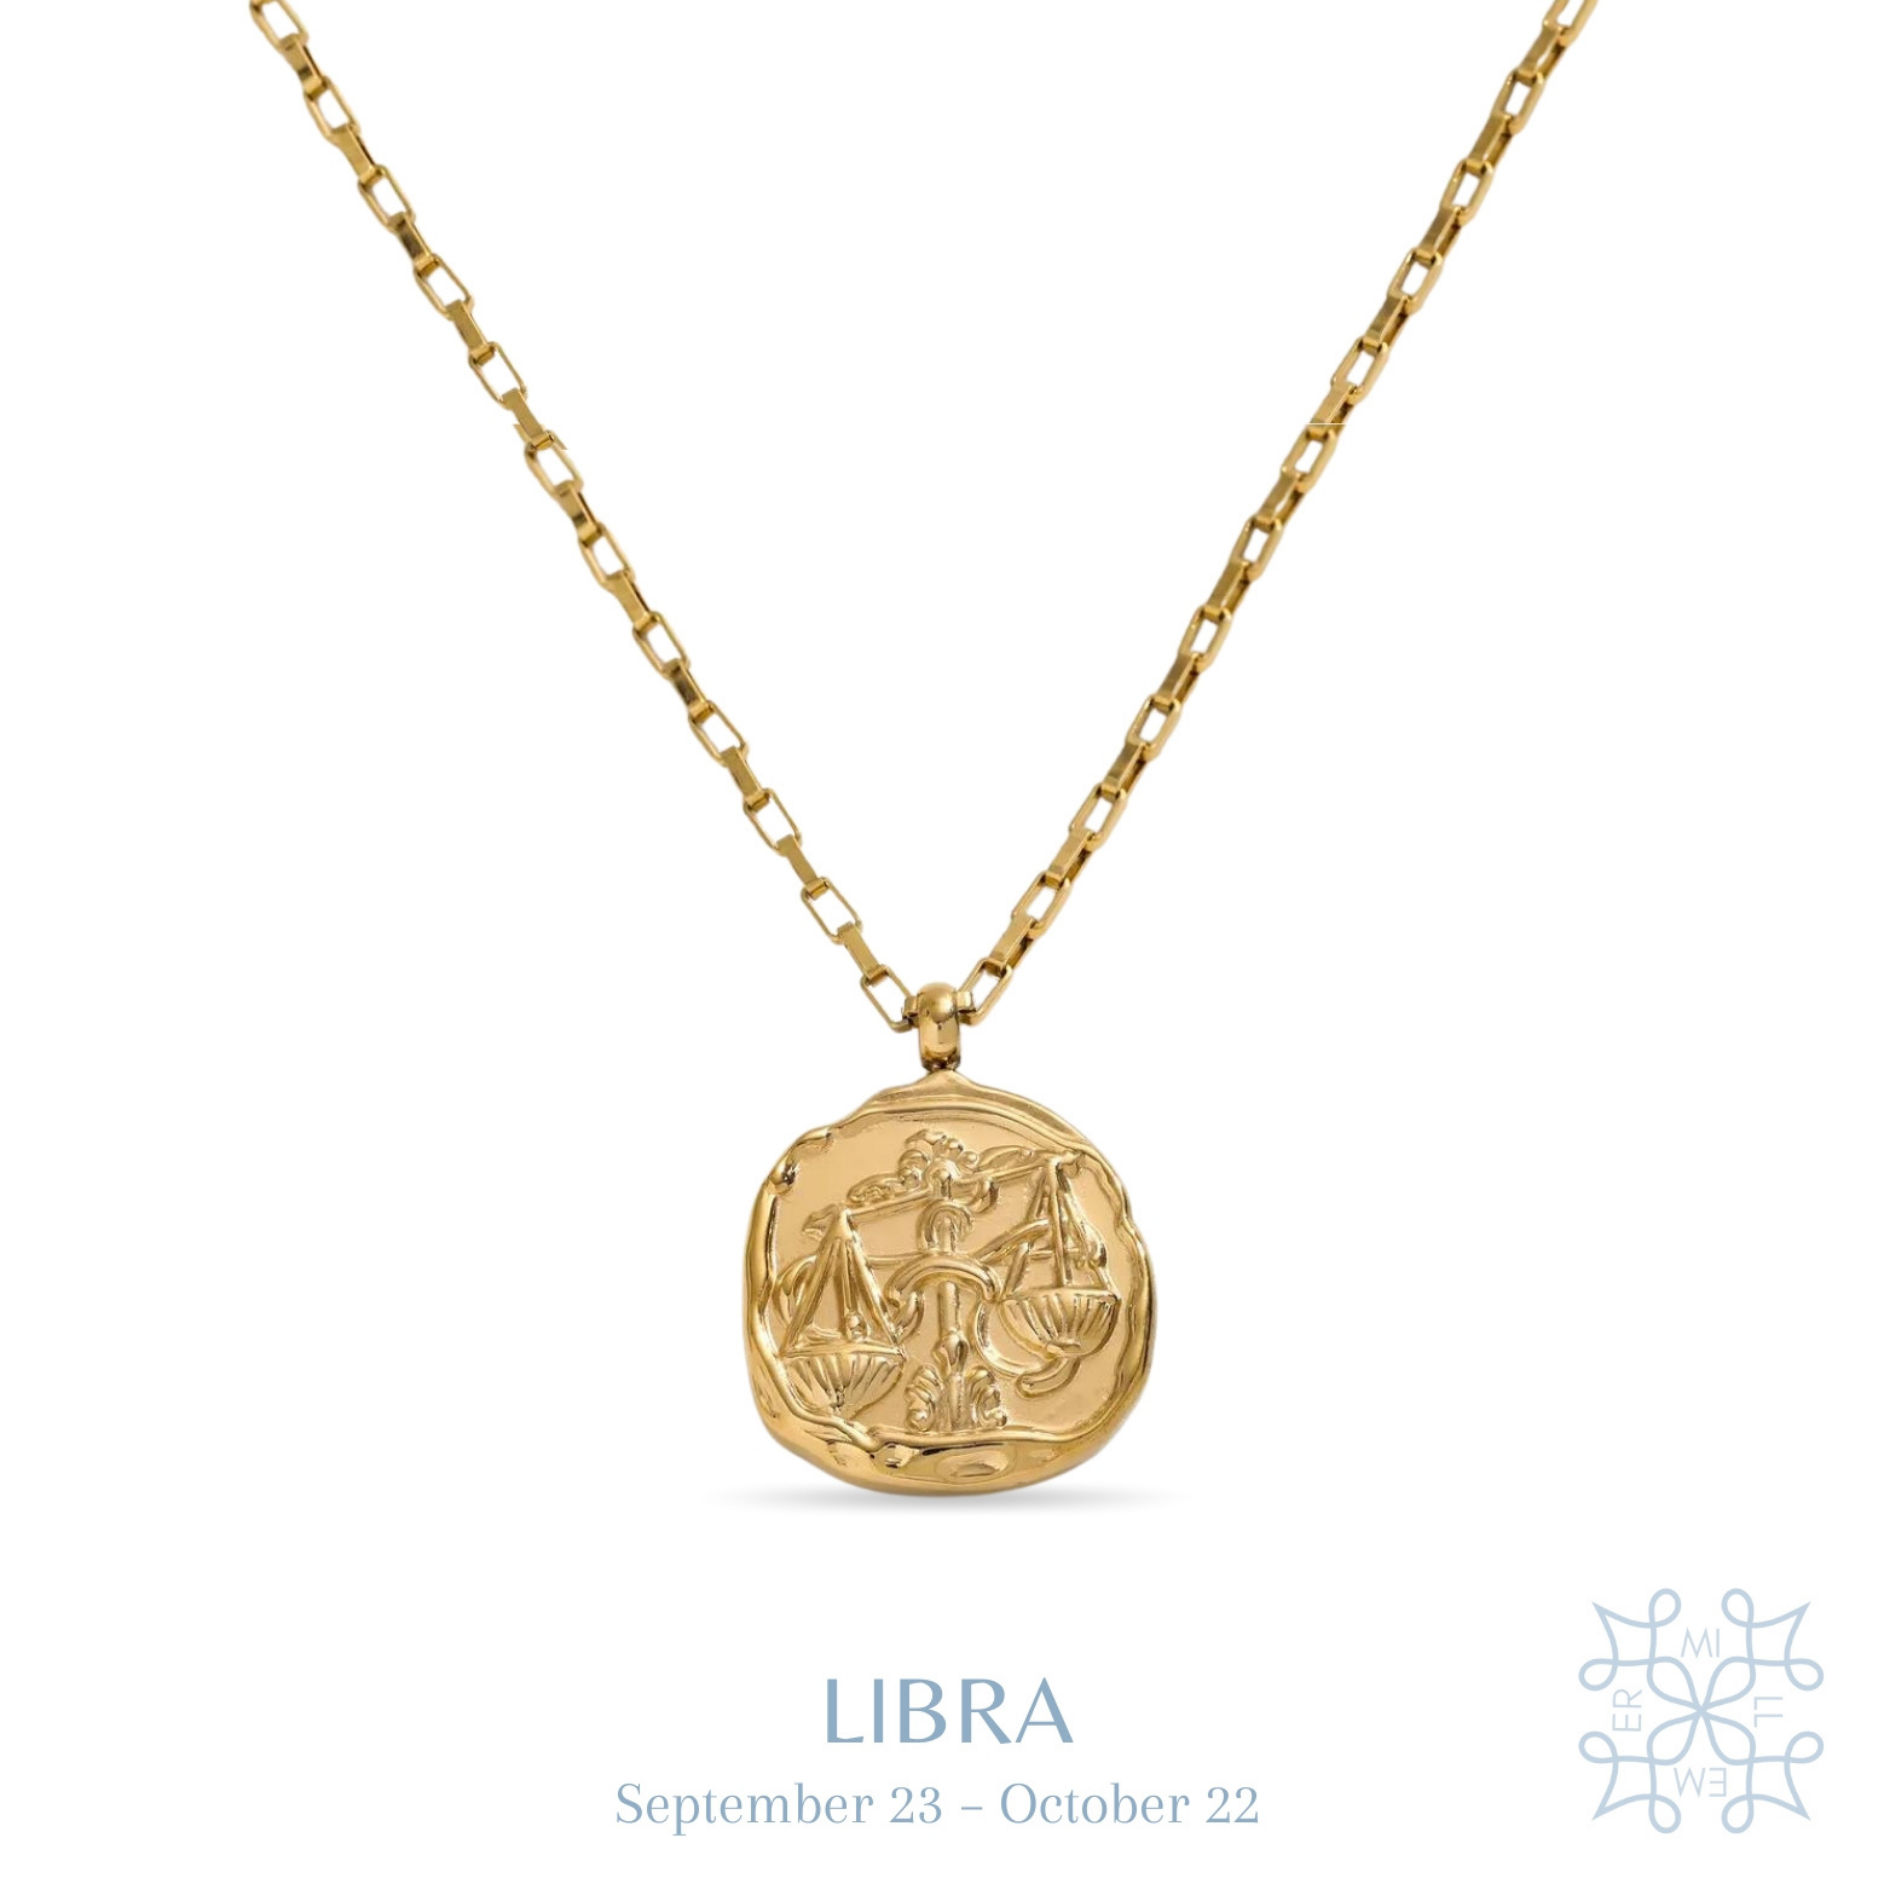 Irregular shape round medallion with Libra symbol in the middle. Gold plated chain and medallion necklace. Libra medallion gold necklace.